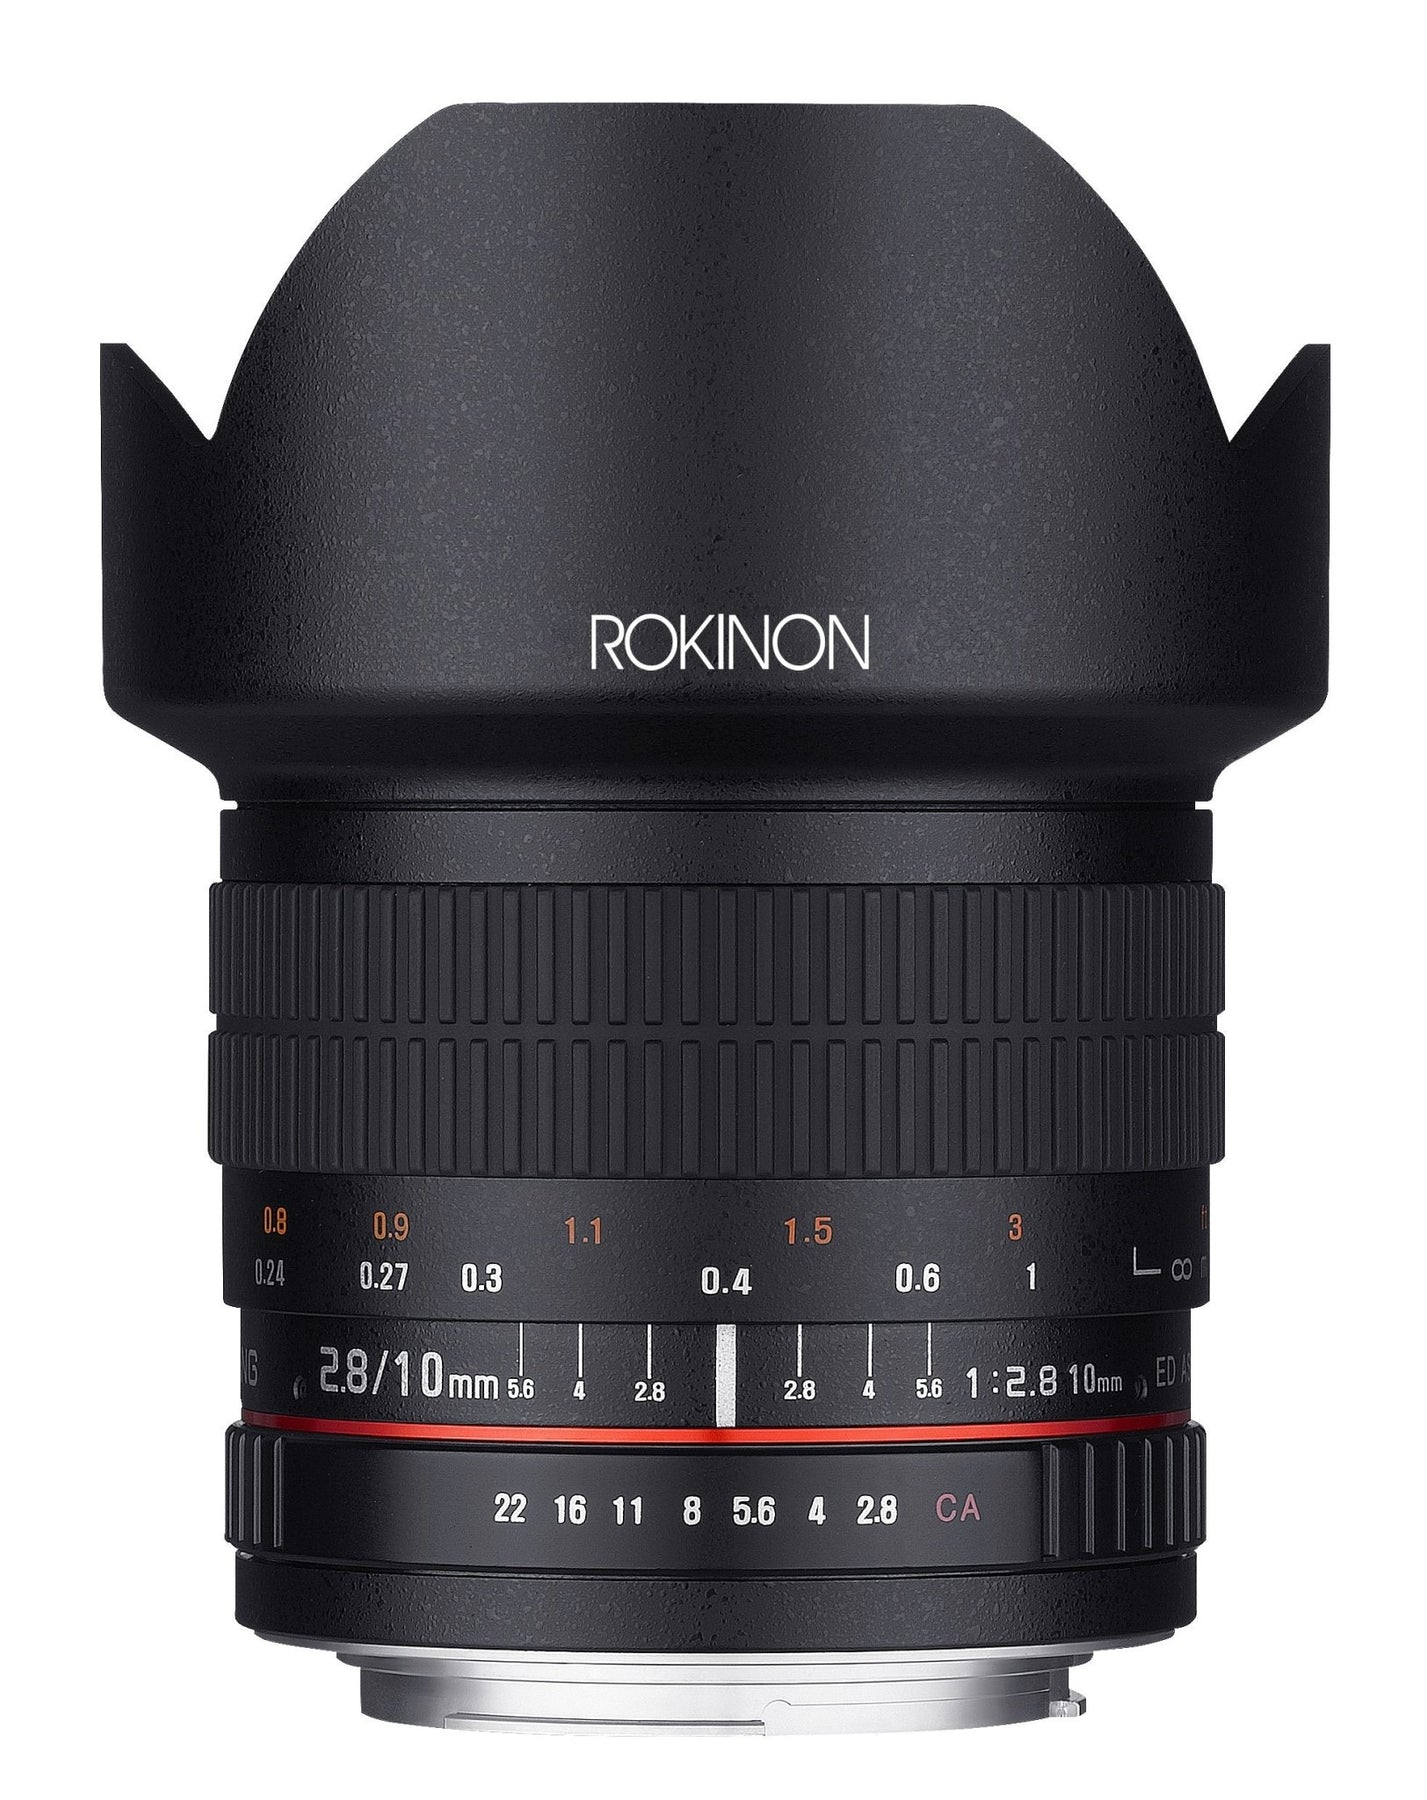 Rokinon 10mm F2.8 Ultra Wide Angle Lens for Pentax K